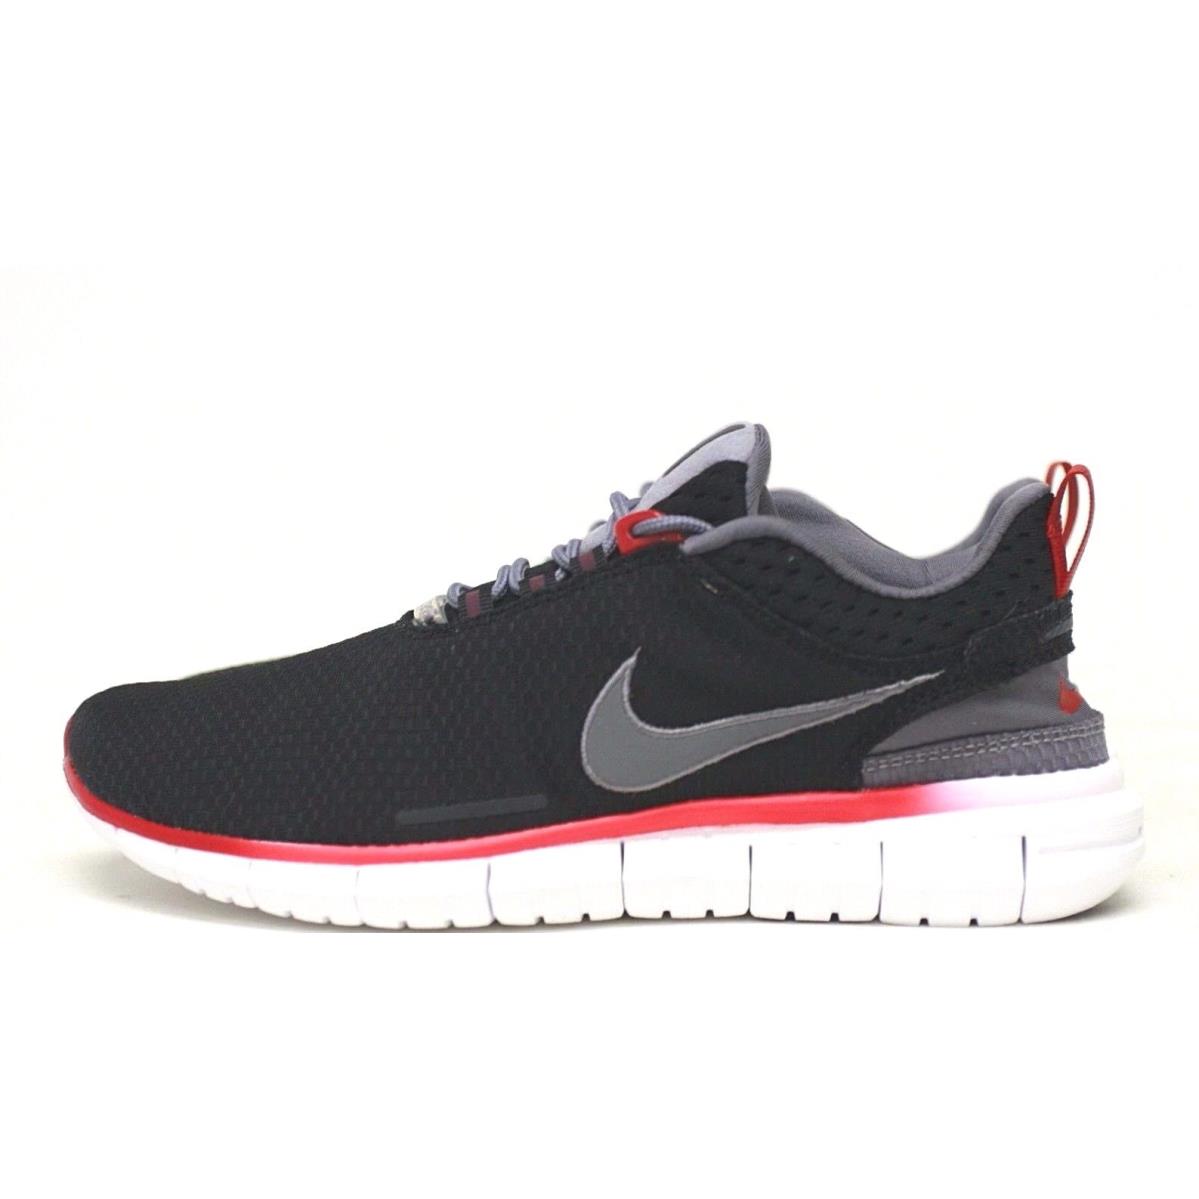 Nike Free OG `14 BR Shoes 644394-001 Mens Size 8 Only Available